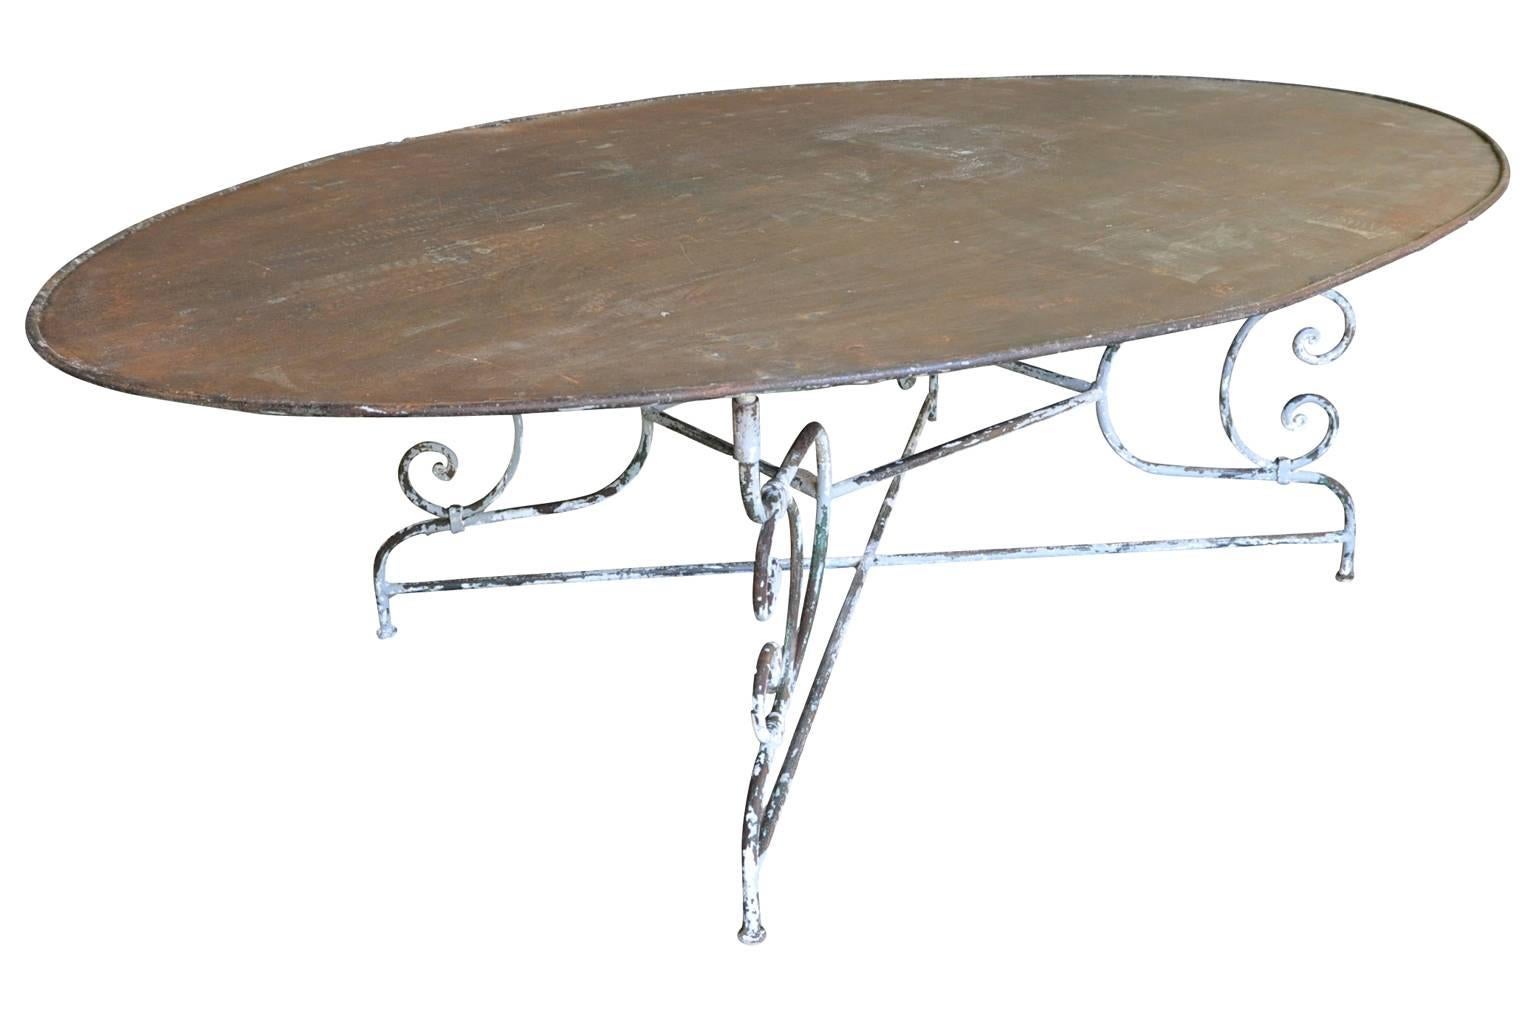 A terrific early 20th century oval garden table, dining table in painted iron. Great for any interior or exterior.